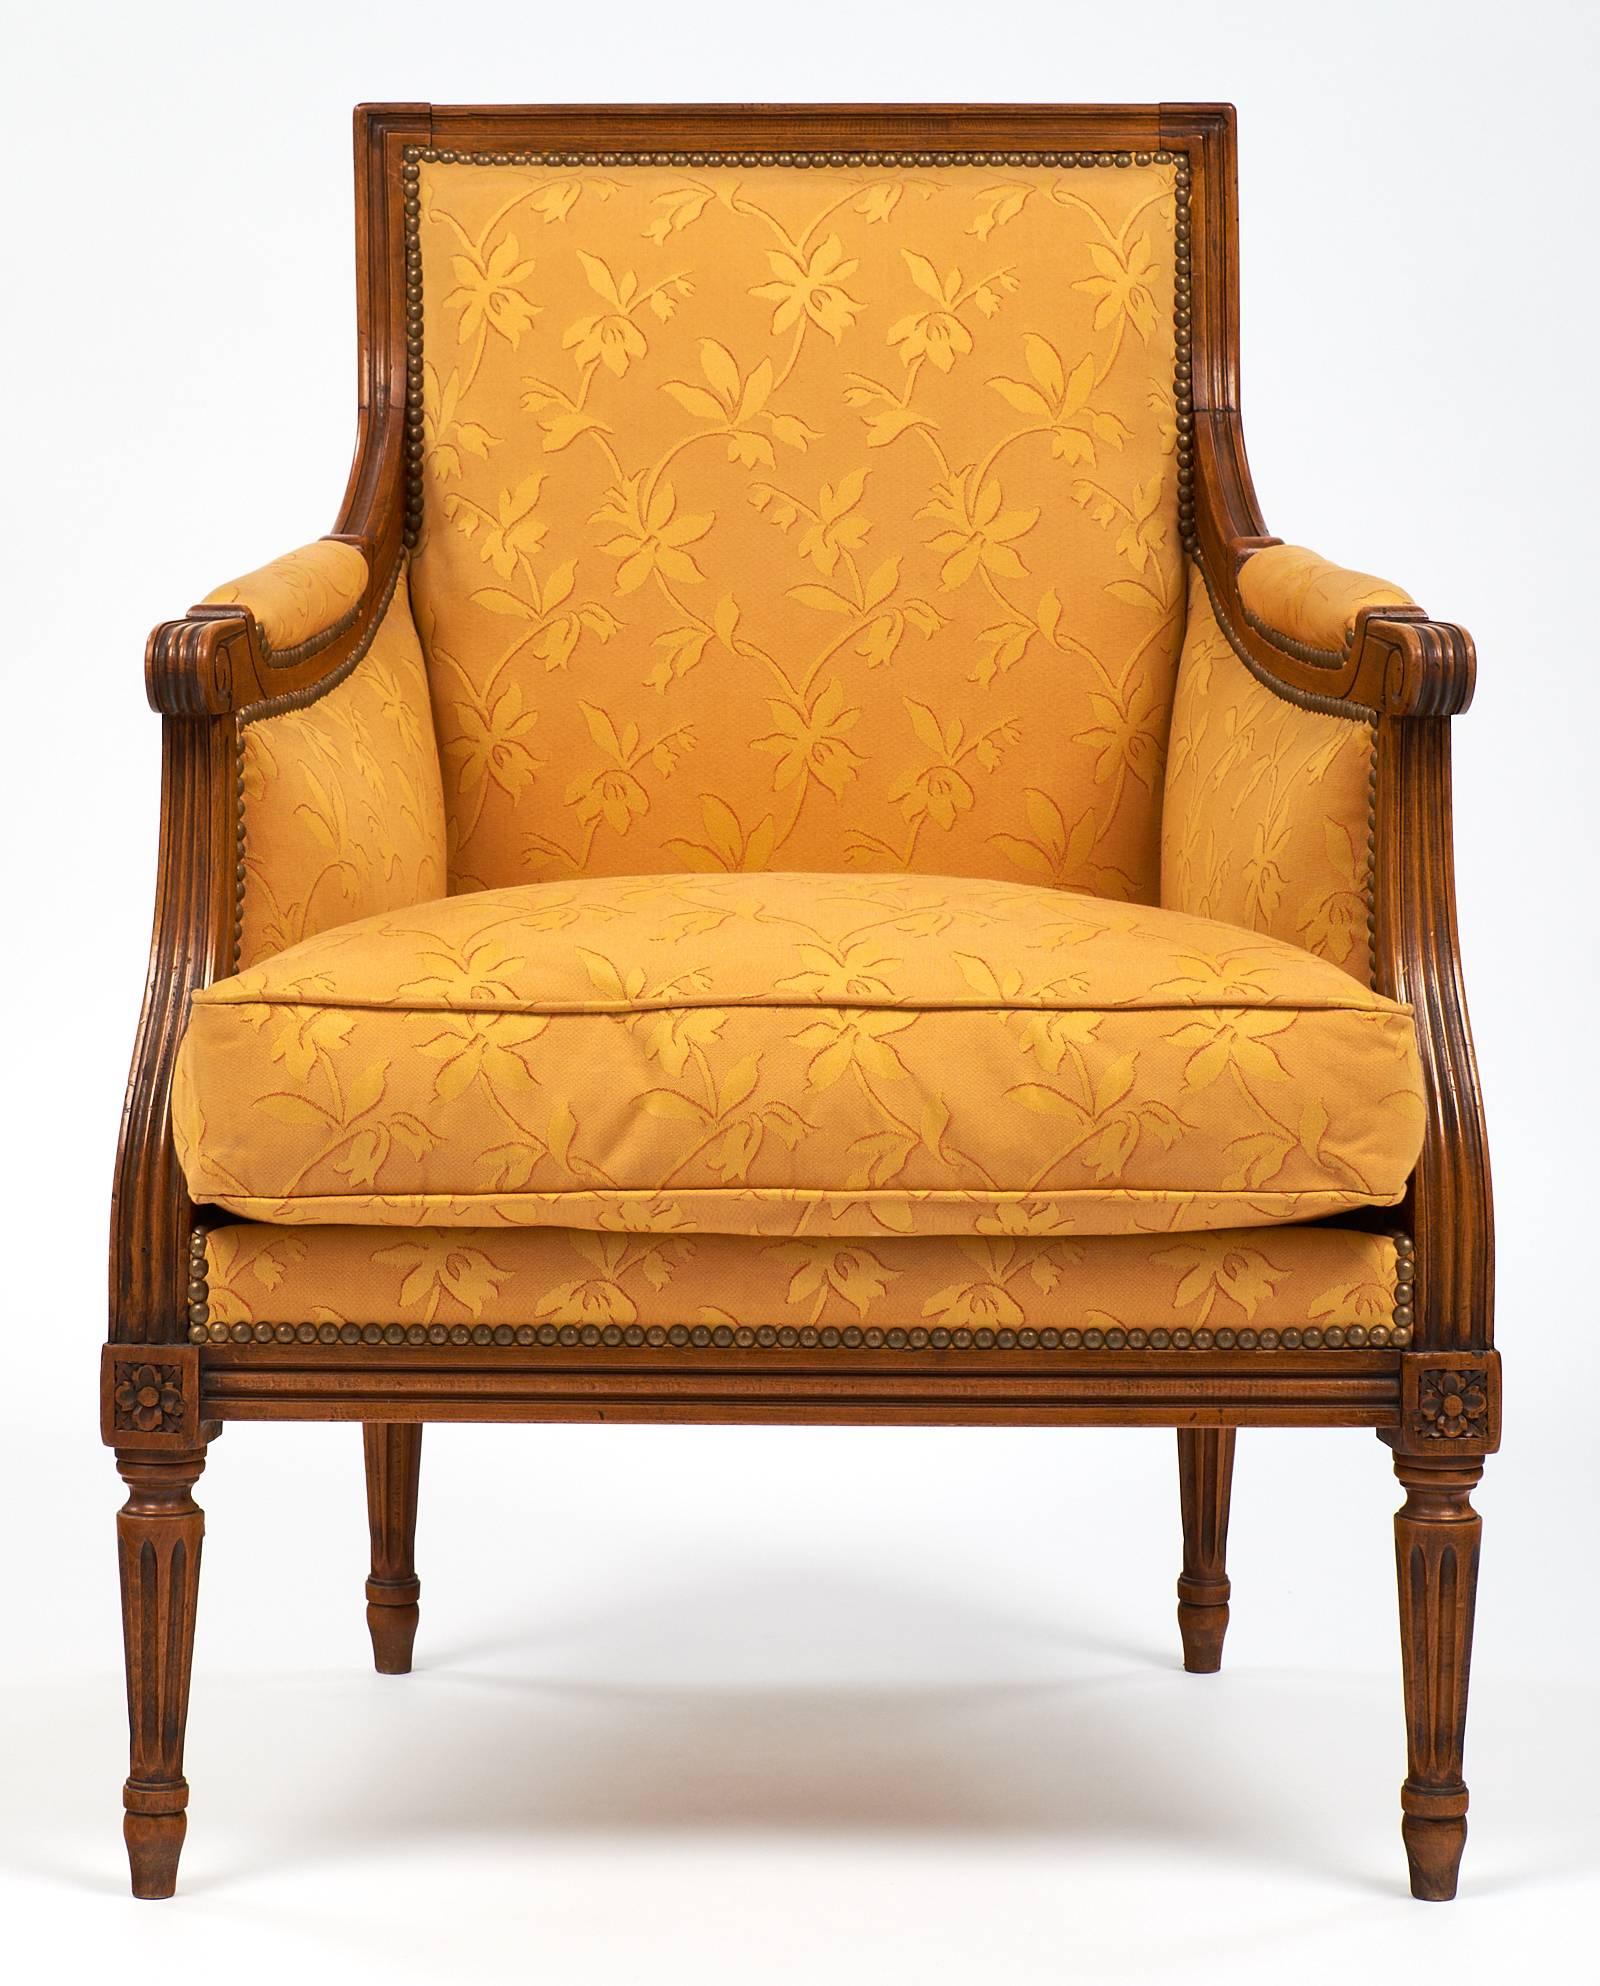 Vintage French Louis XVI style bergères with solid cheerywood frames and complimentary fabric upholstery in a floral pattern. The legs have hand-carved fluting and details! Each chair features a square back and down filled pillows. We love the